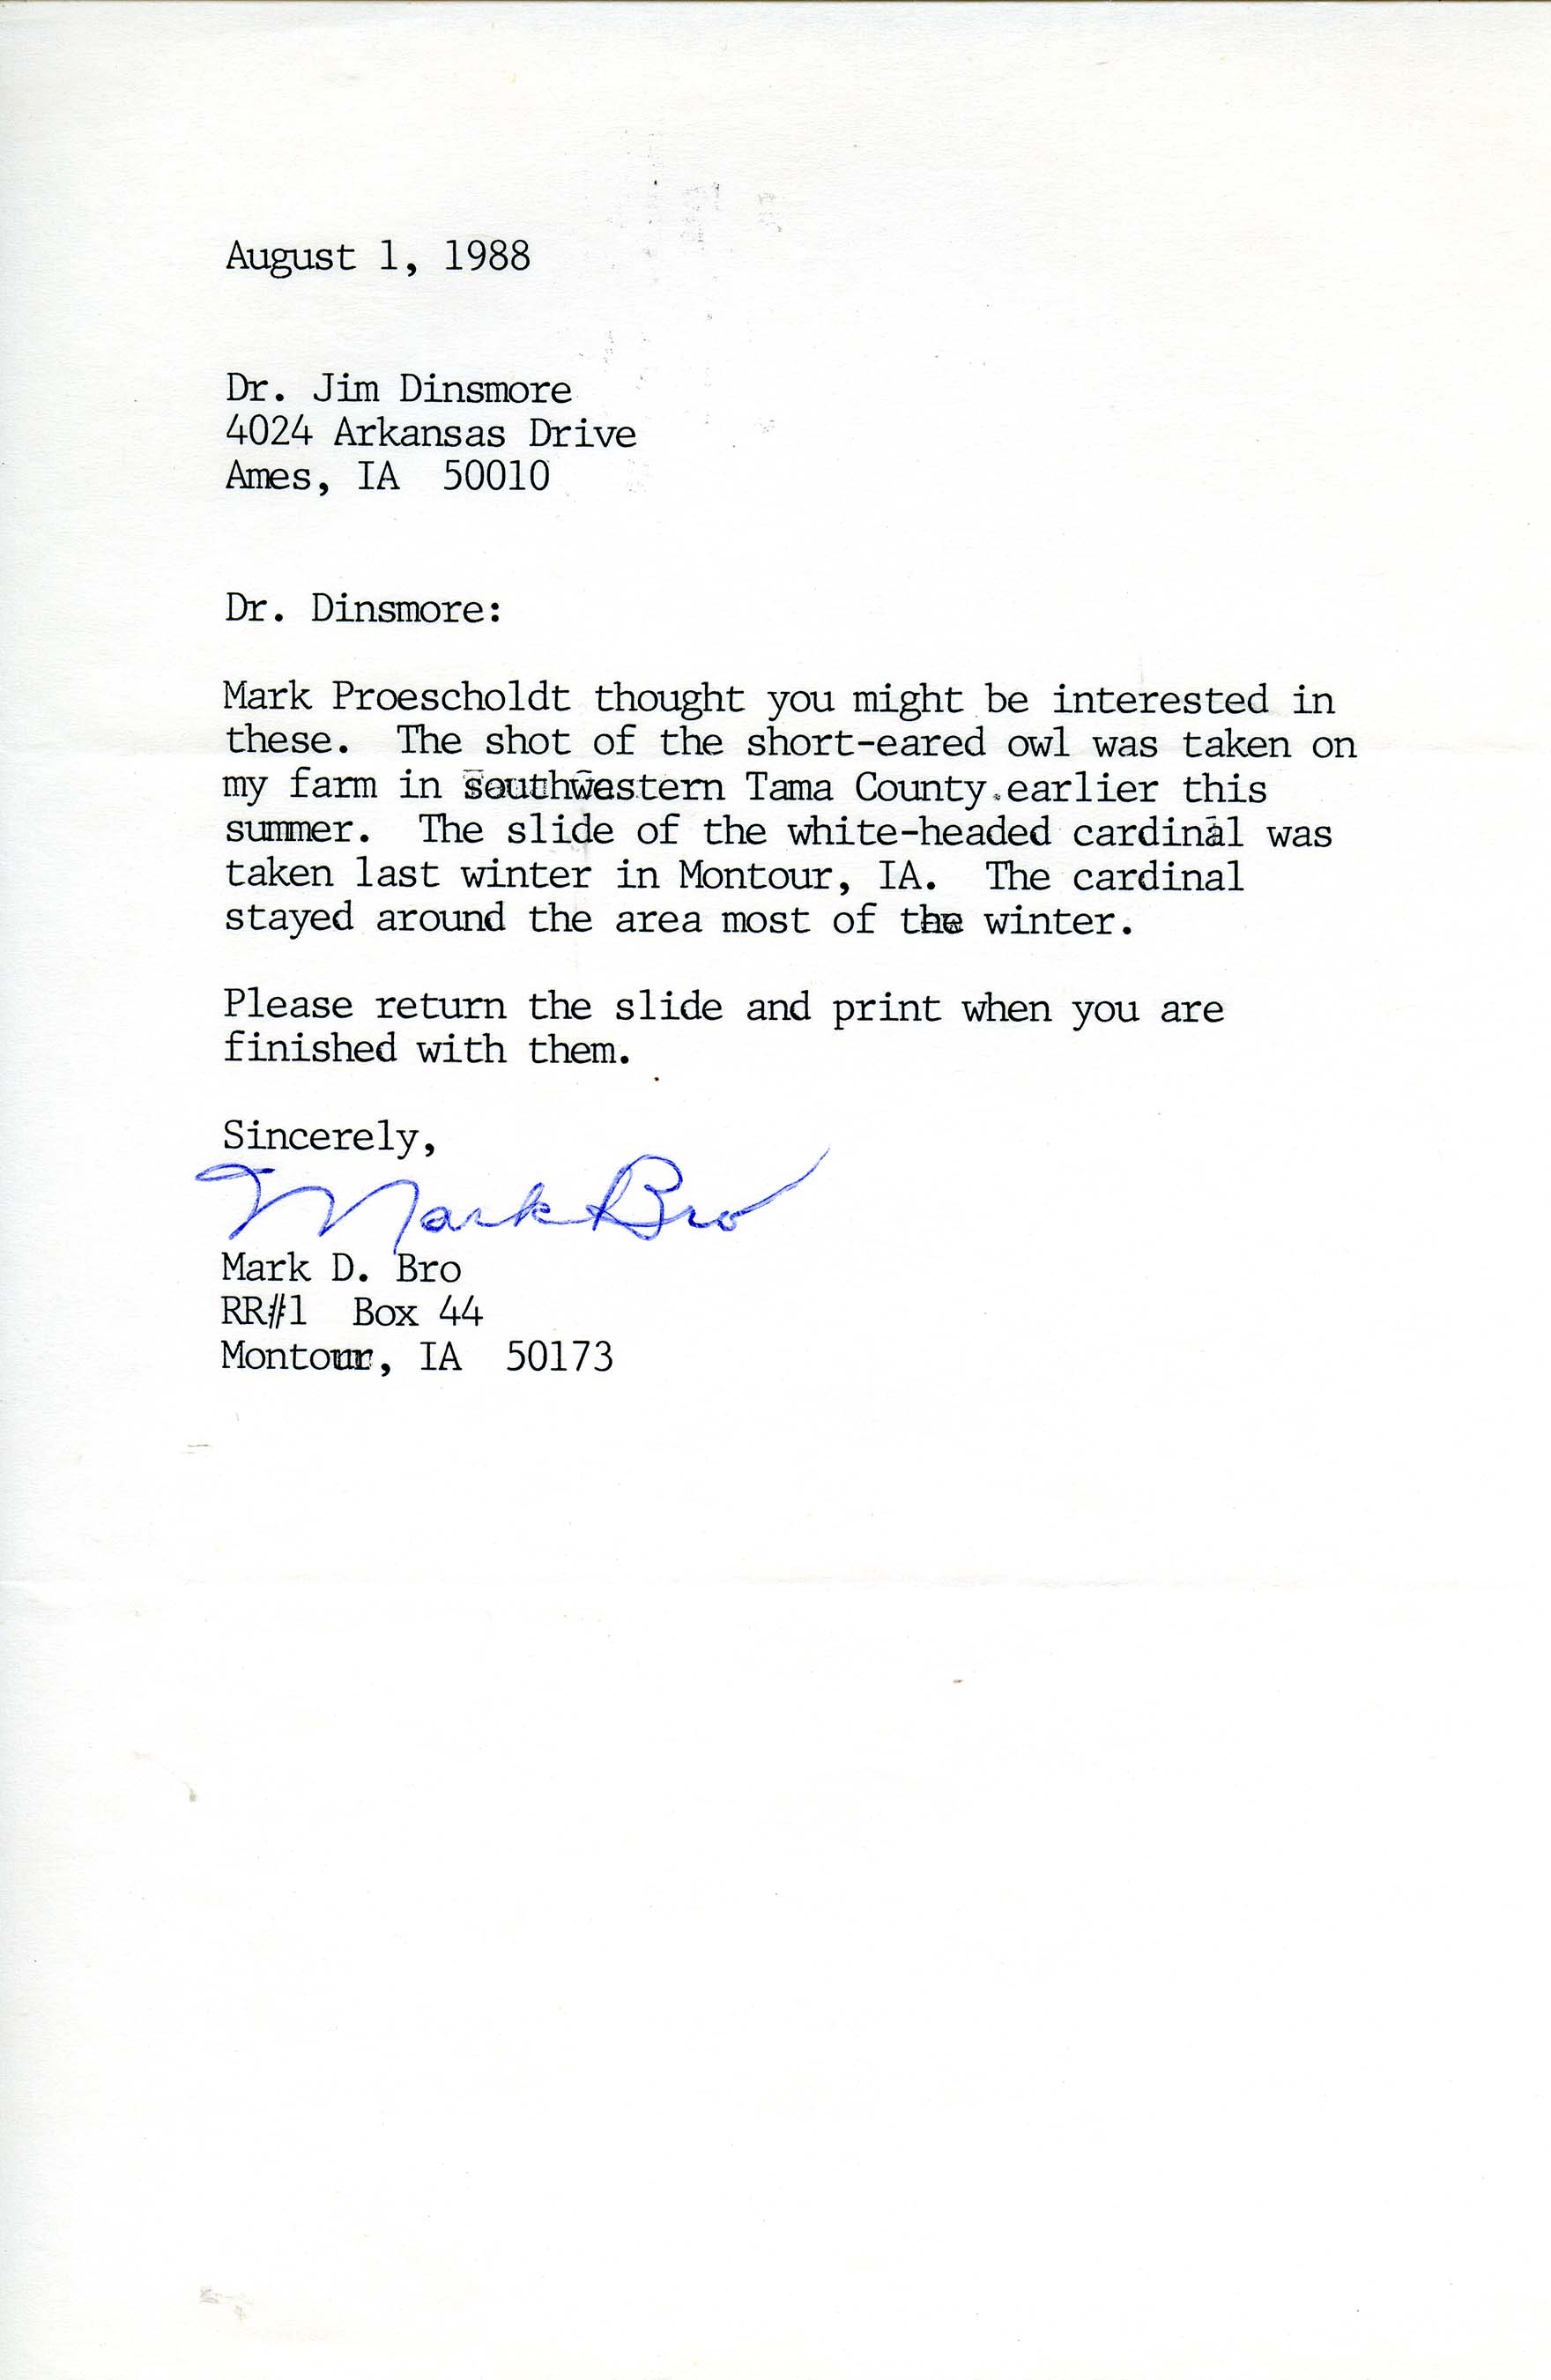 Mark D. Bro letter to James J. Dinsmore regarding photographs of a Short-eared Owl and an unusual Northern Cardinal, August 1, 1988